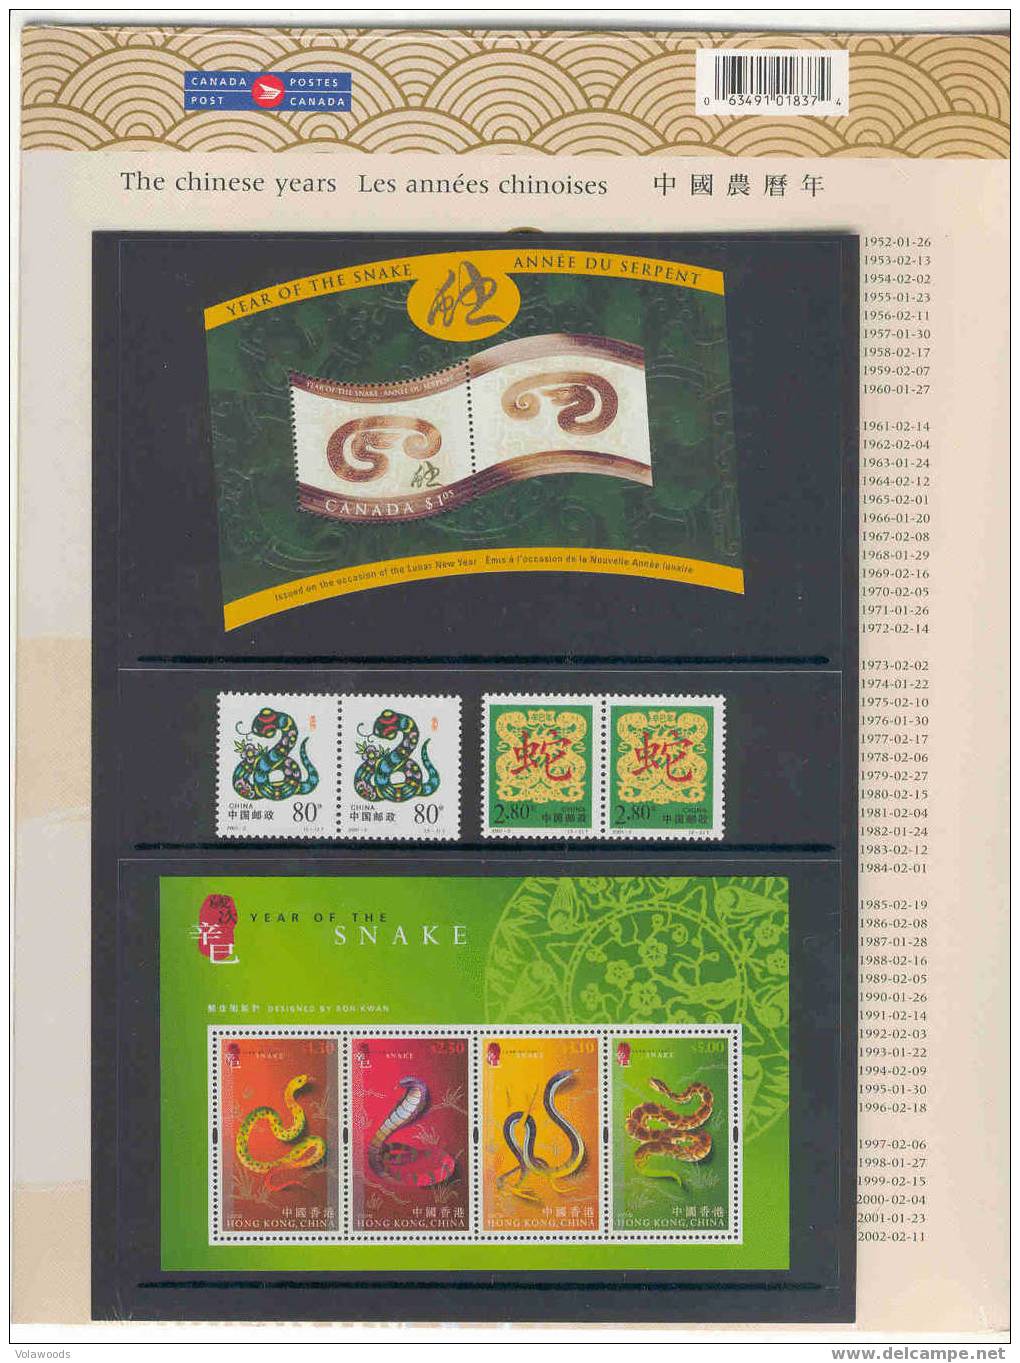 New Year 2001 - Year Of The Snake - Joint Issue Canada China Hong Kong - - Chinese New Year